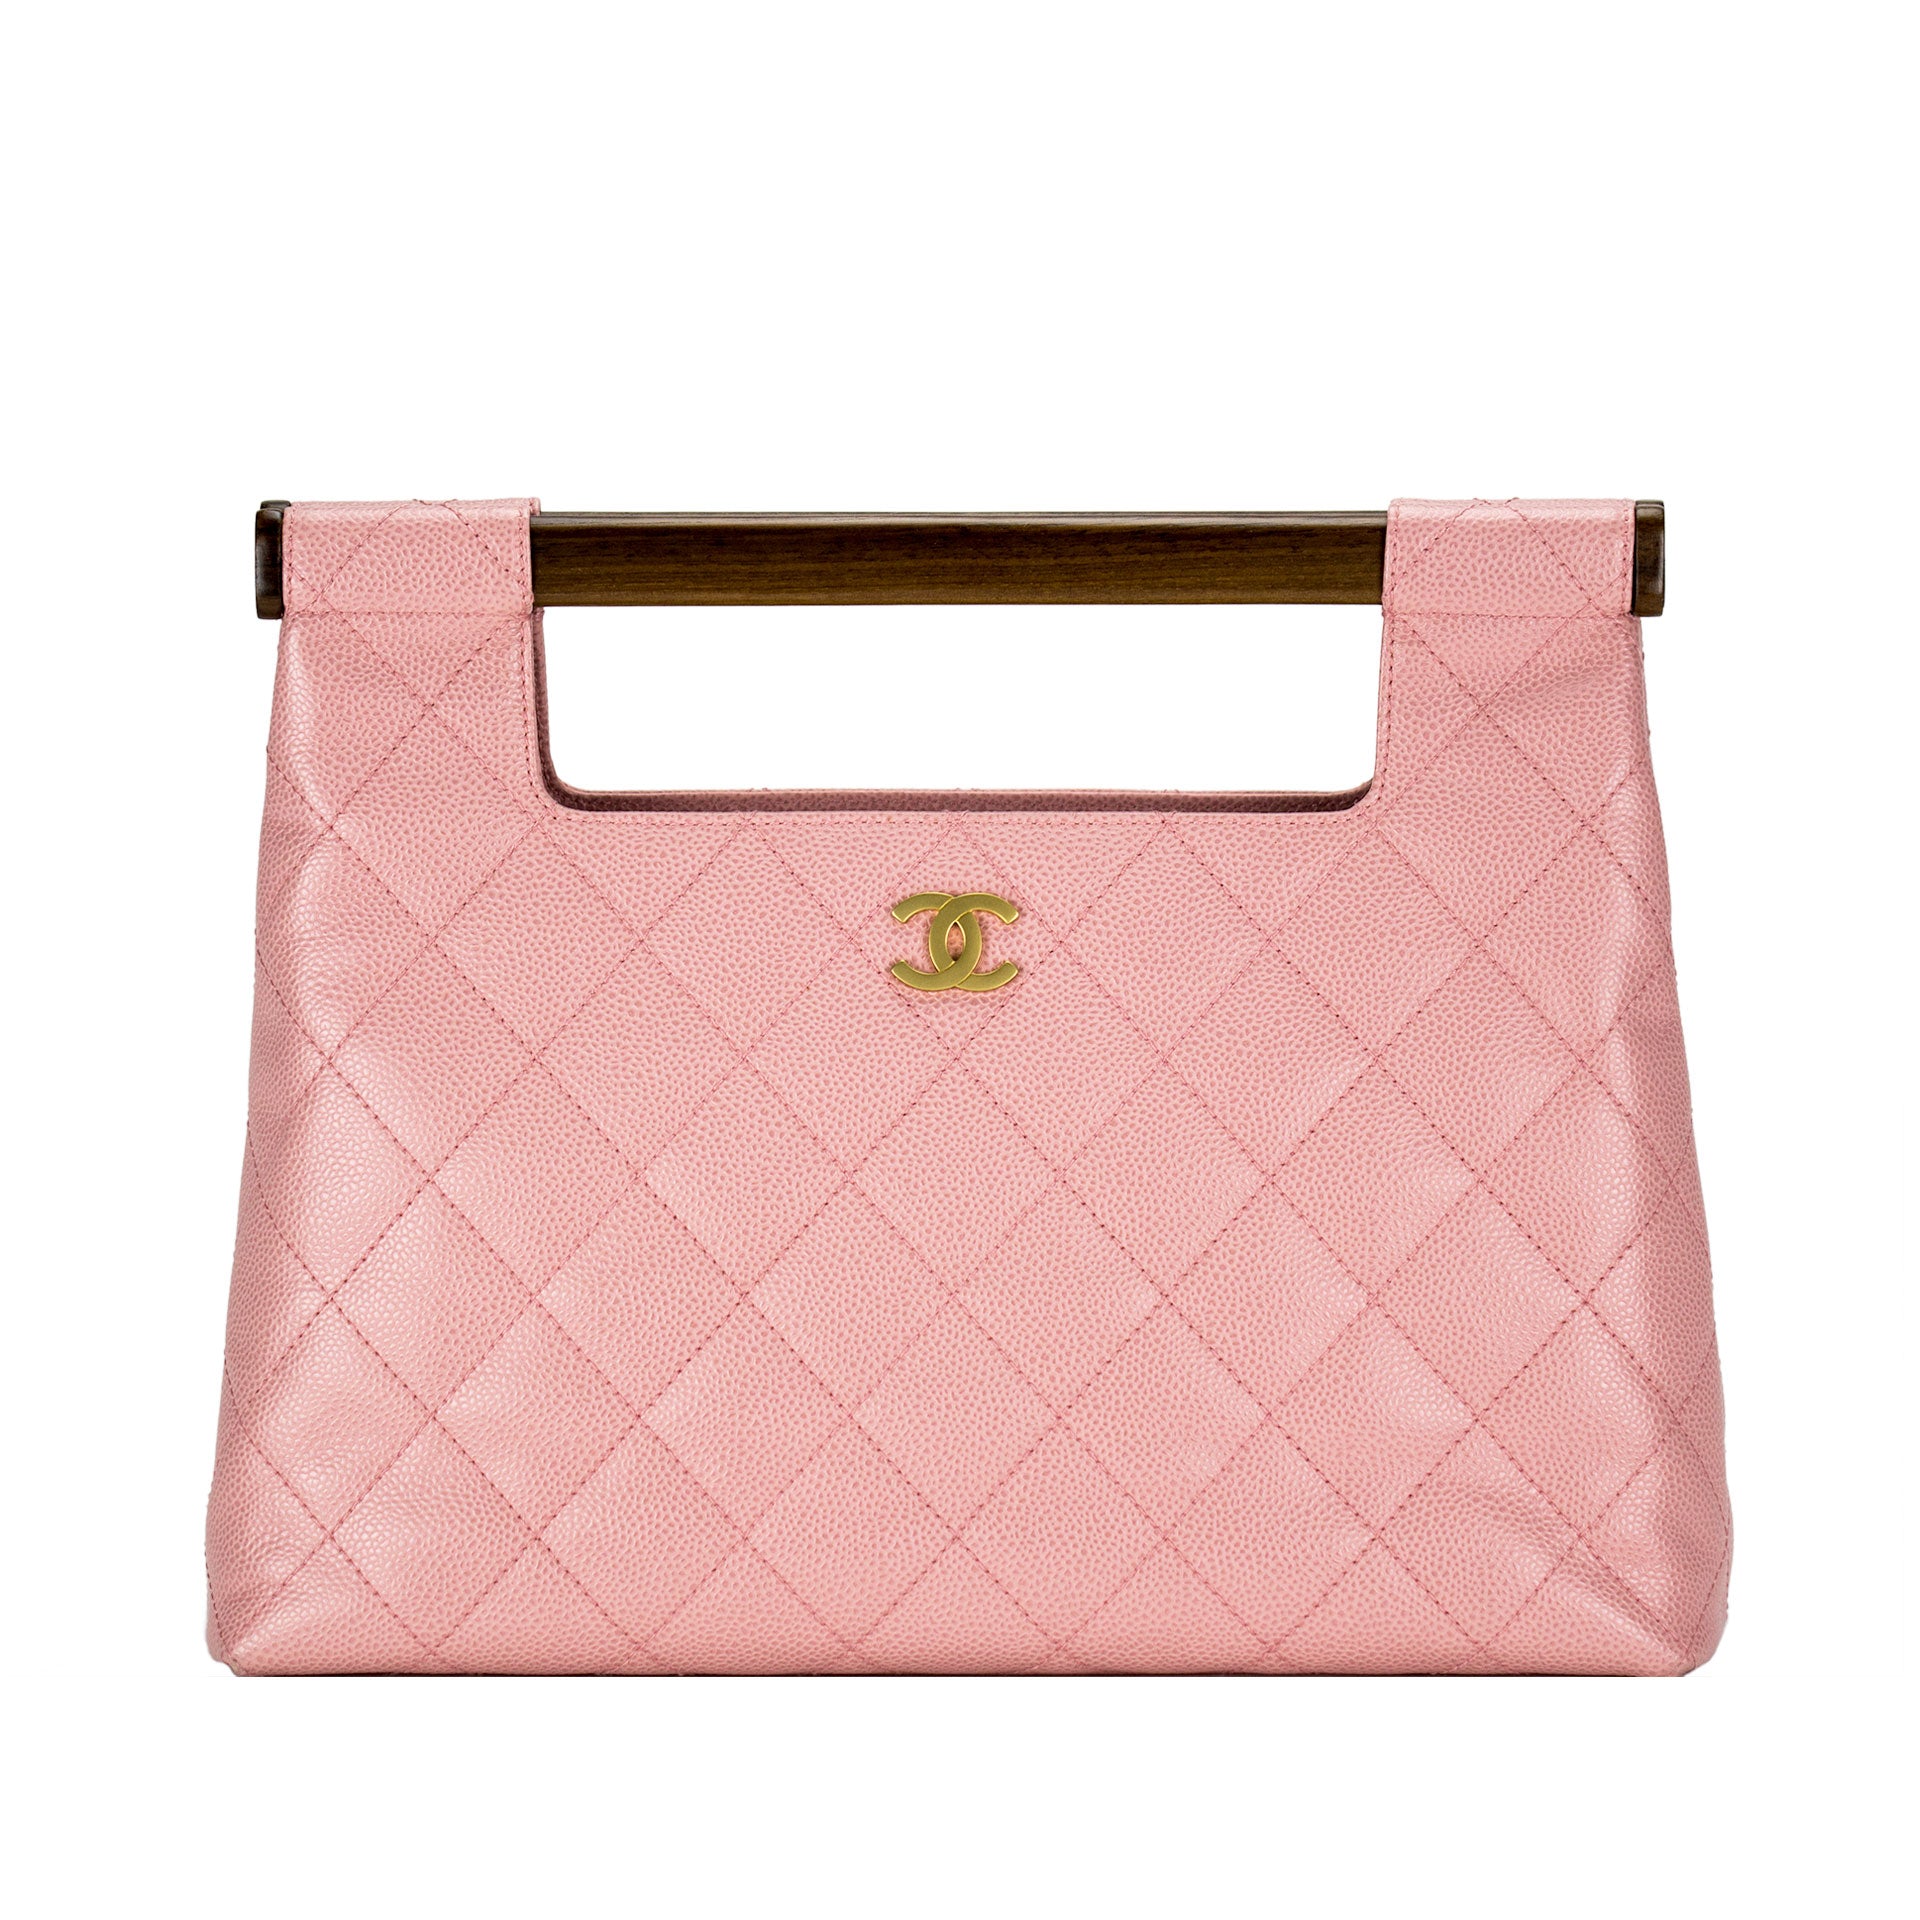 Timeless classique top handle leather handbag Chanel Pink in Leather   25302876